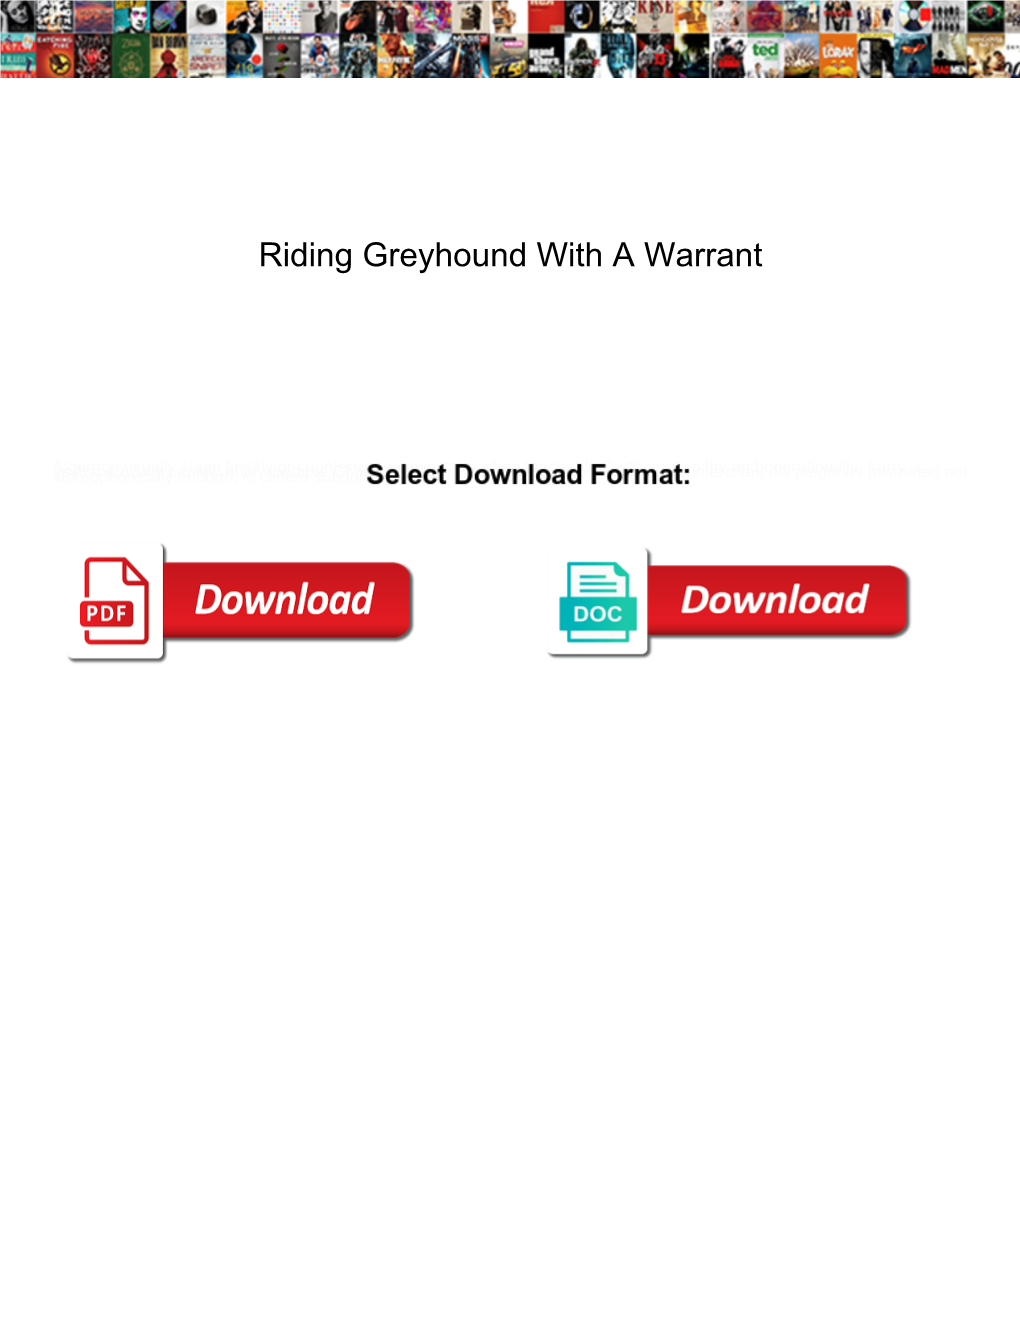 Riding Greyhound with a Warrant